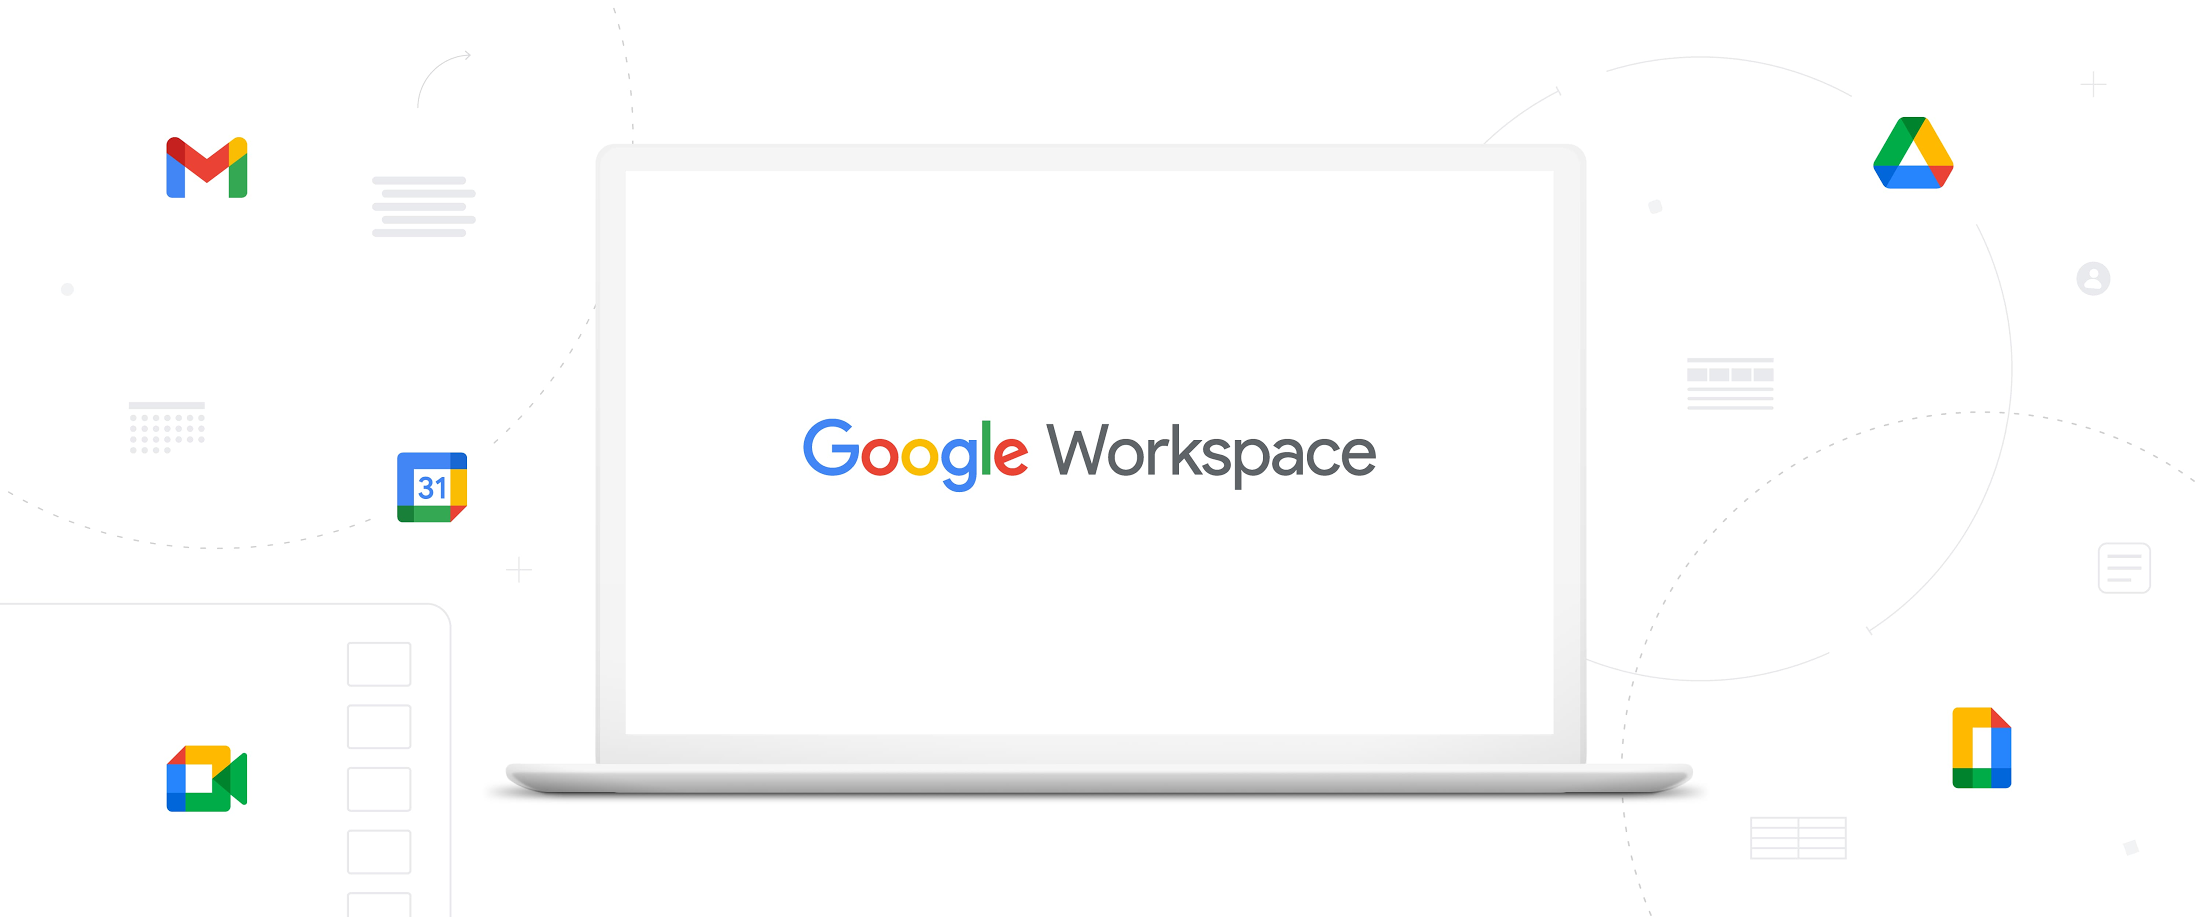 Google Workspace | Your Connected Google Experience Just Got Better!